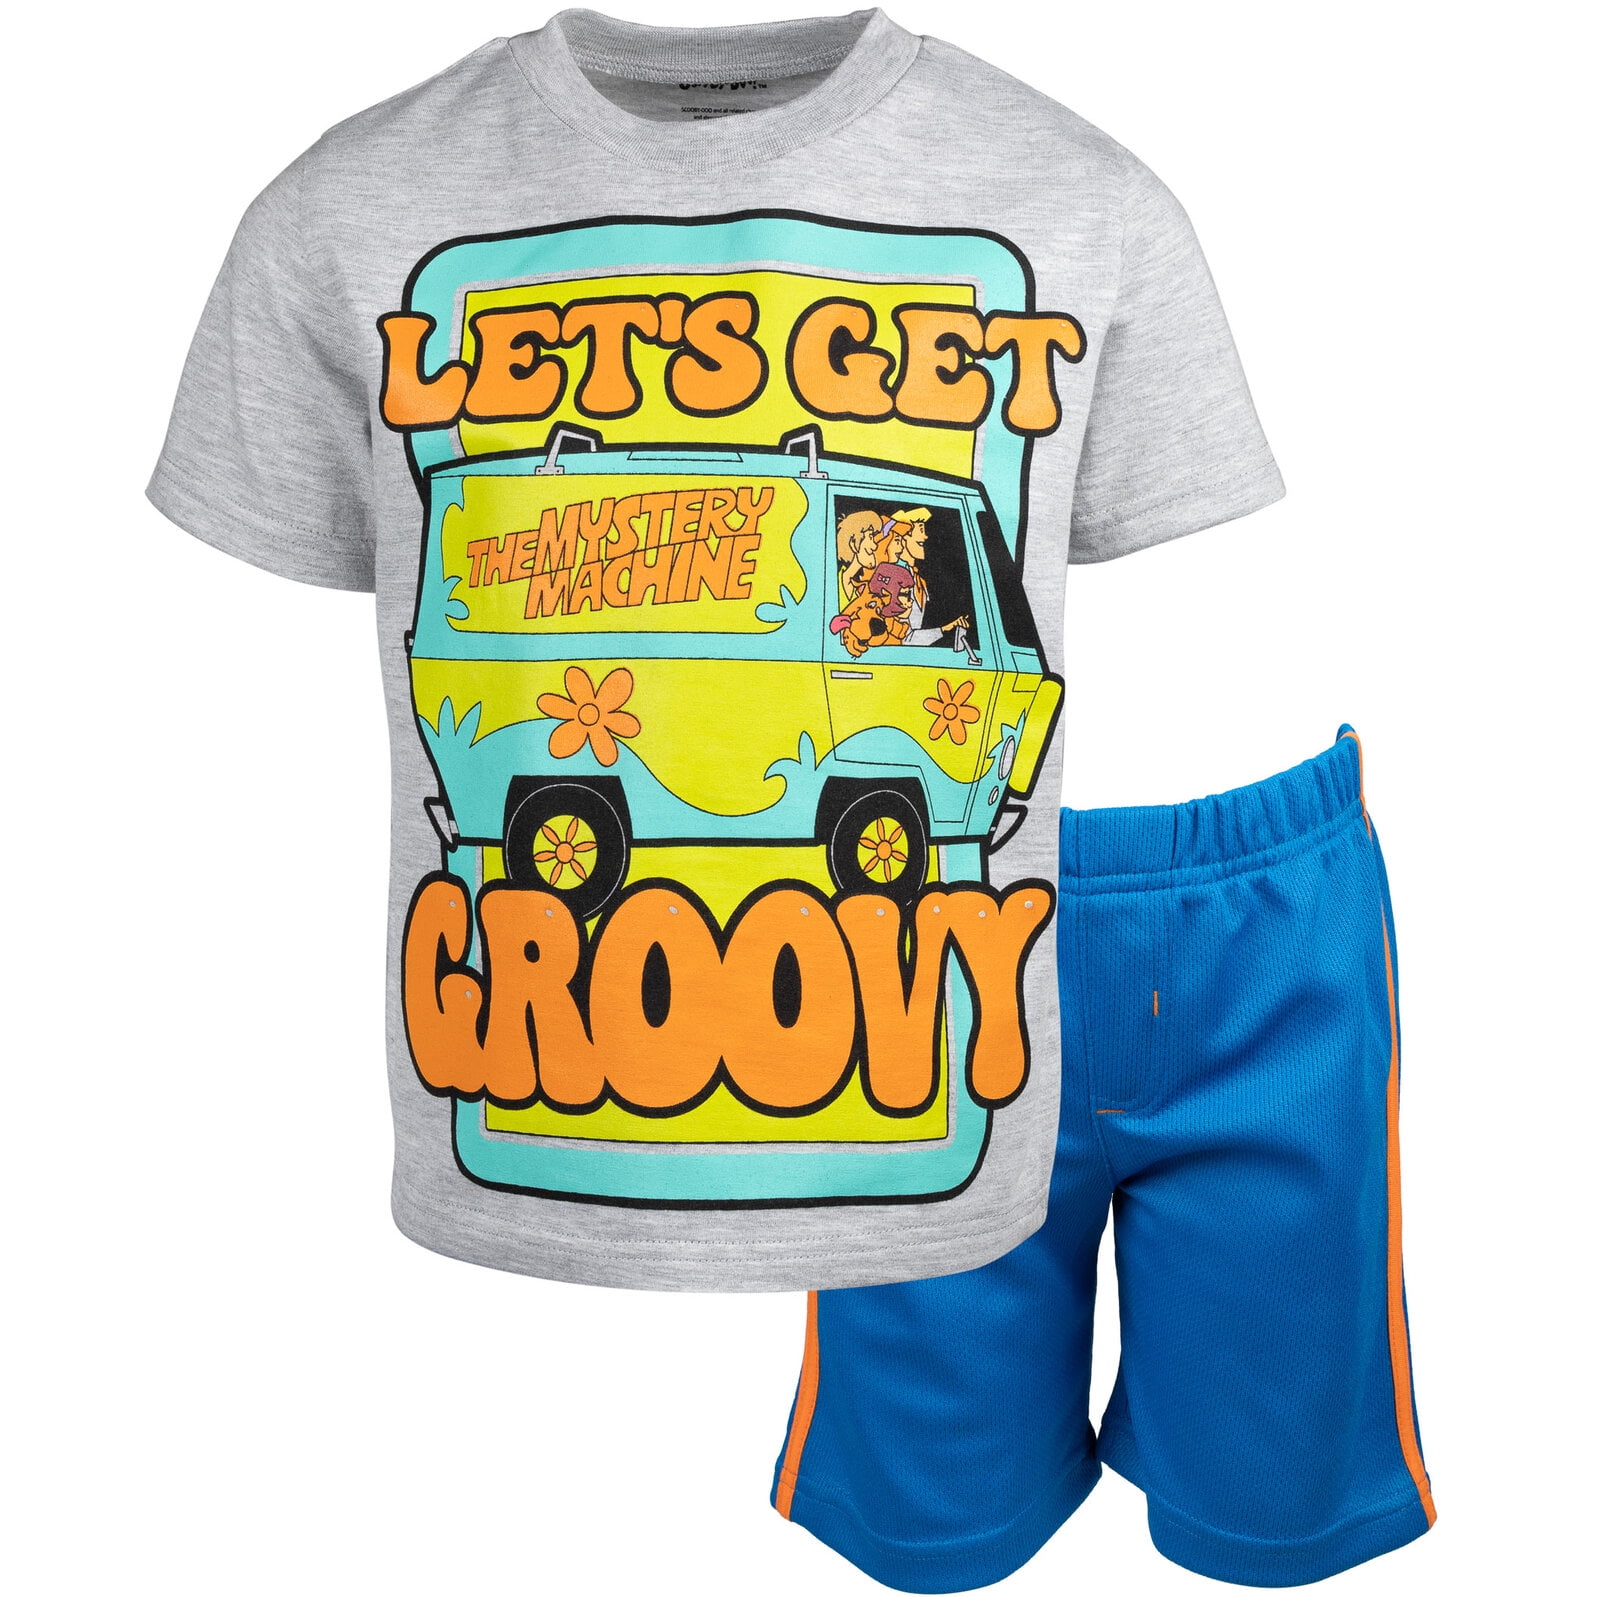 Scooby-Doo Scooby Doo Little Boys T-Shirt and Mesh Shorts Outfit Set  Toddler to Big Kid